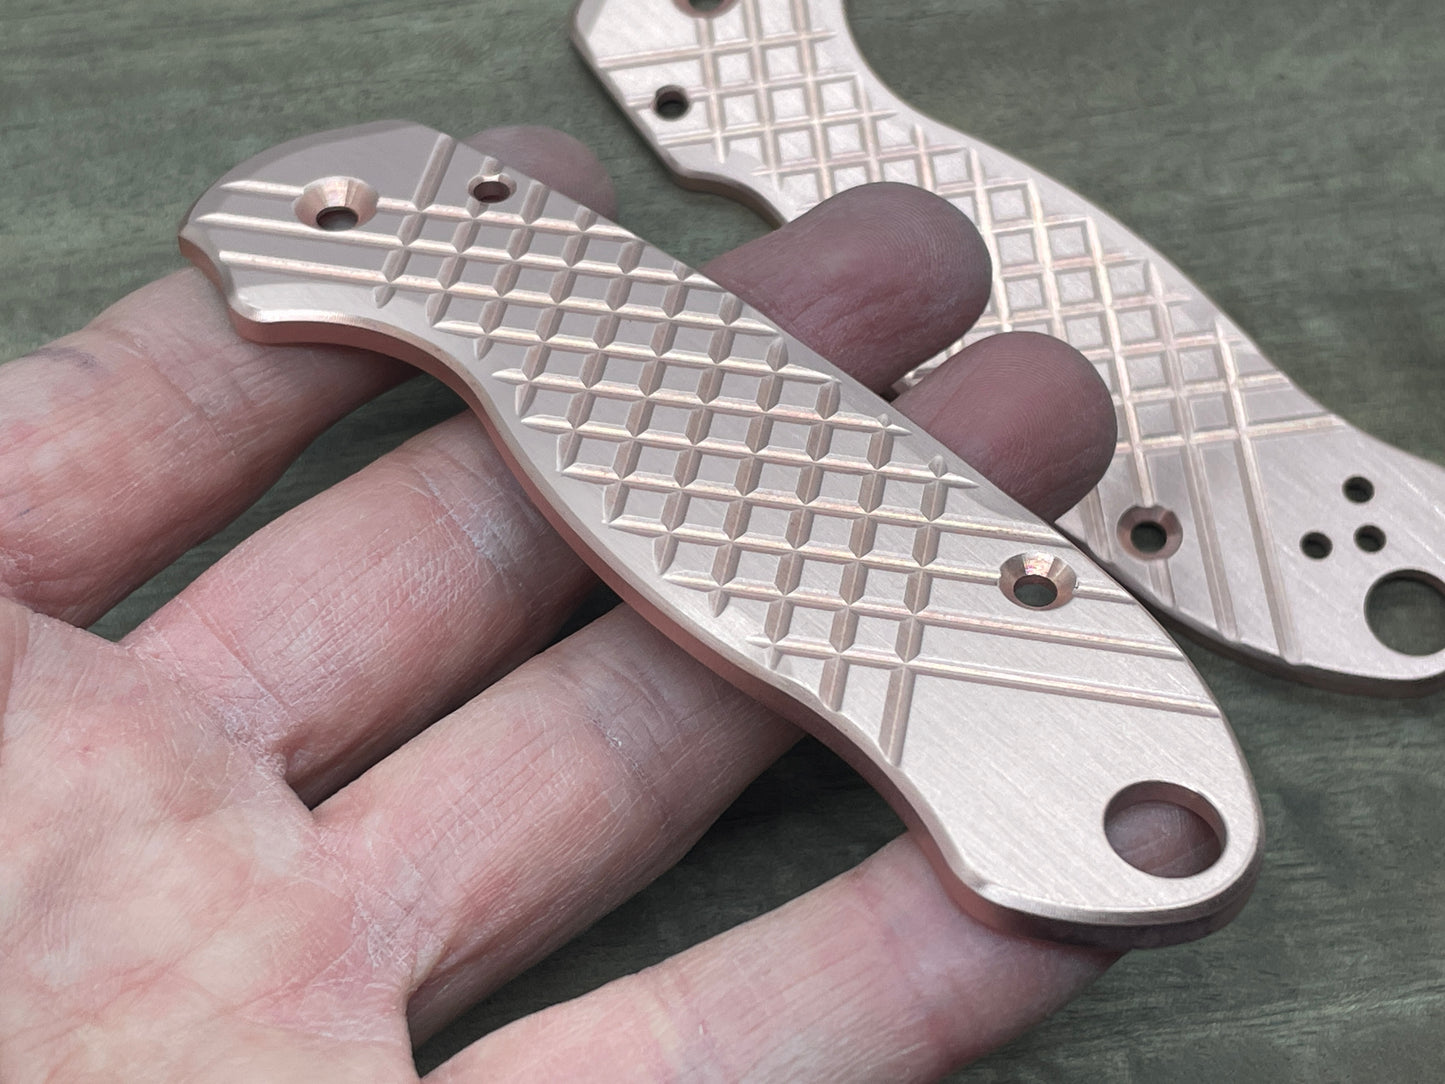 FRAG Cnc milled BRUSHED Copper Scales for Spyderco Para 3